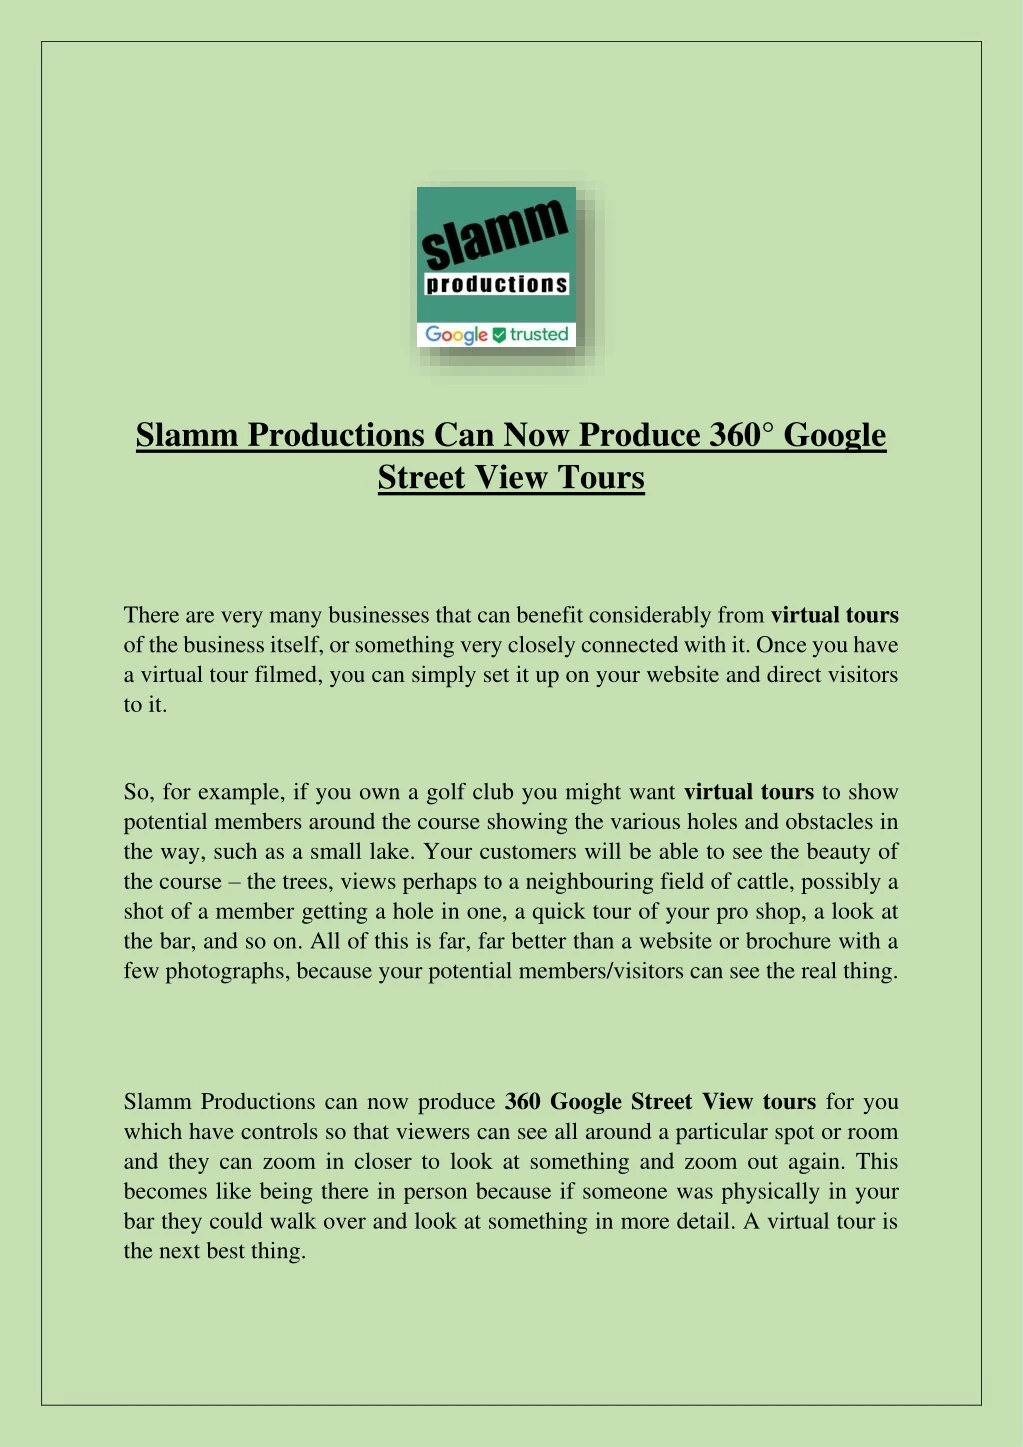 slamm productions can now produce 360 google